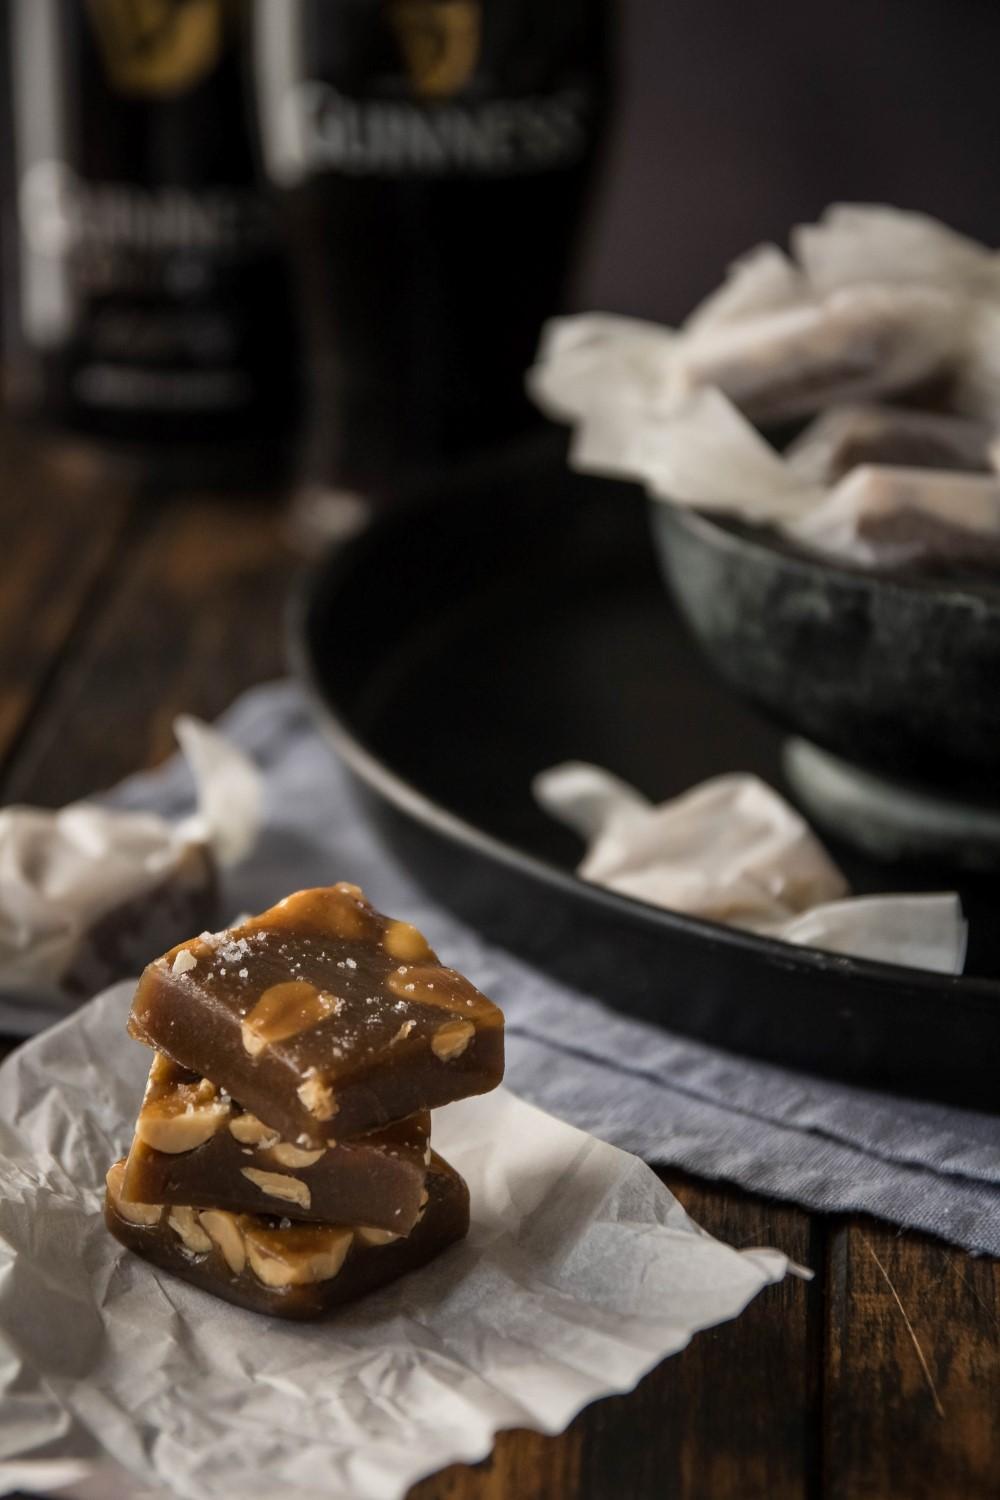 Use Your Noodles - Guinness Caramels With Salted Peanuts